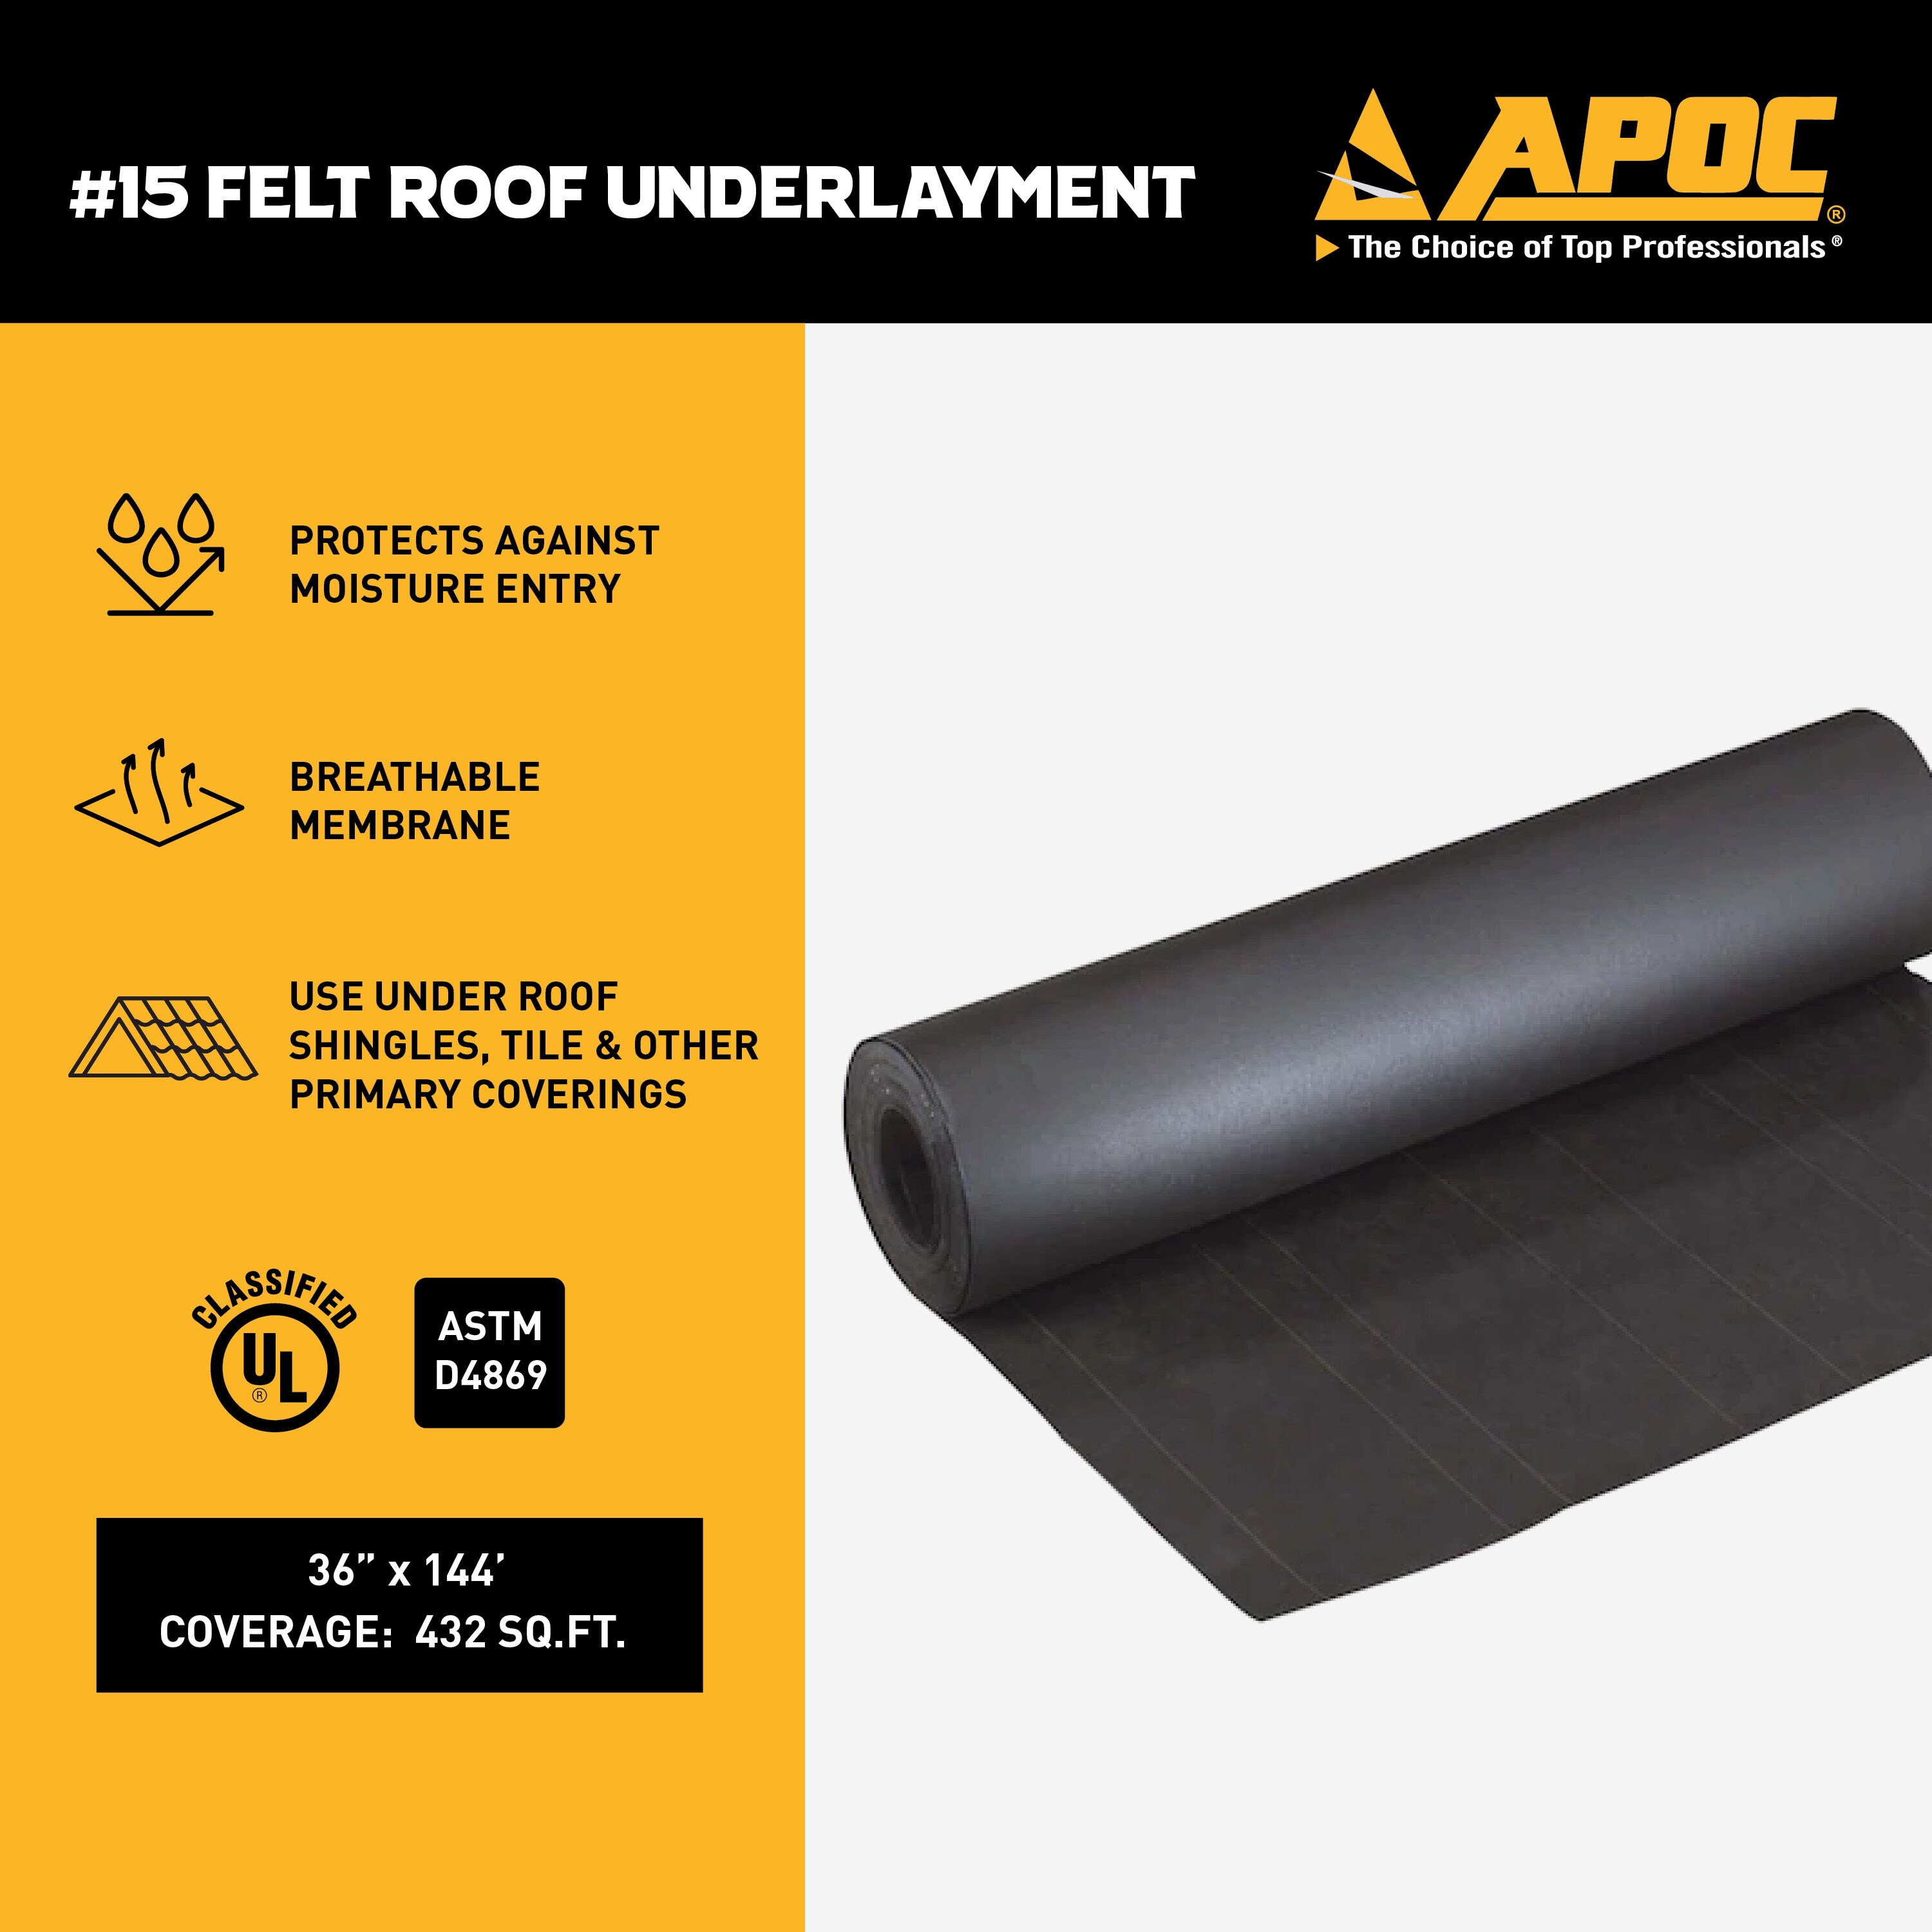 36in 15-lb. ROOFING FELT PAPER ROLL 400 SQUARE FEET COVERAGE